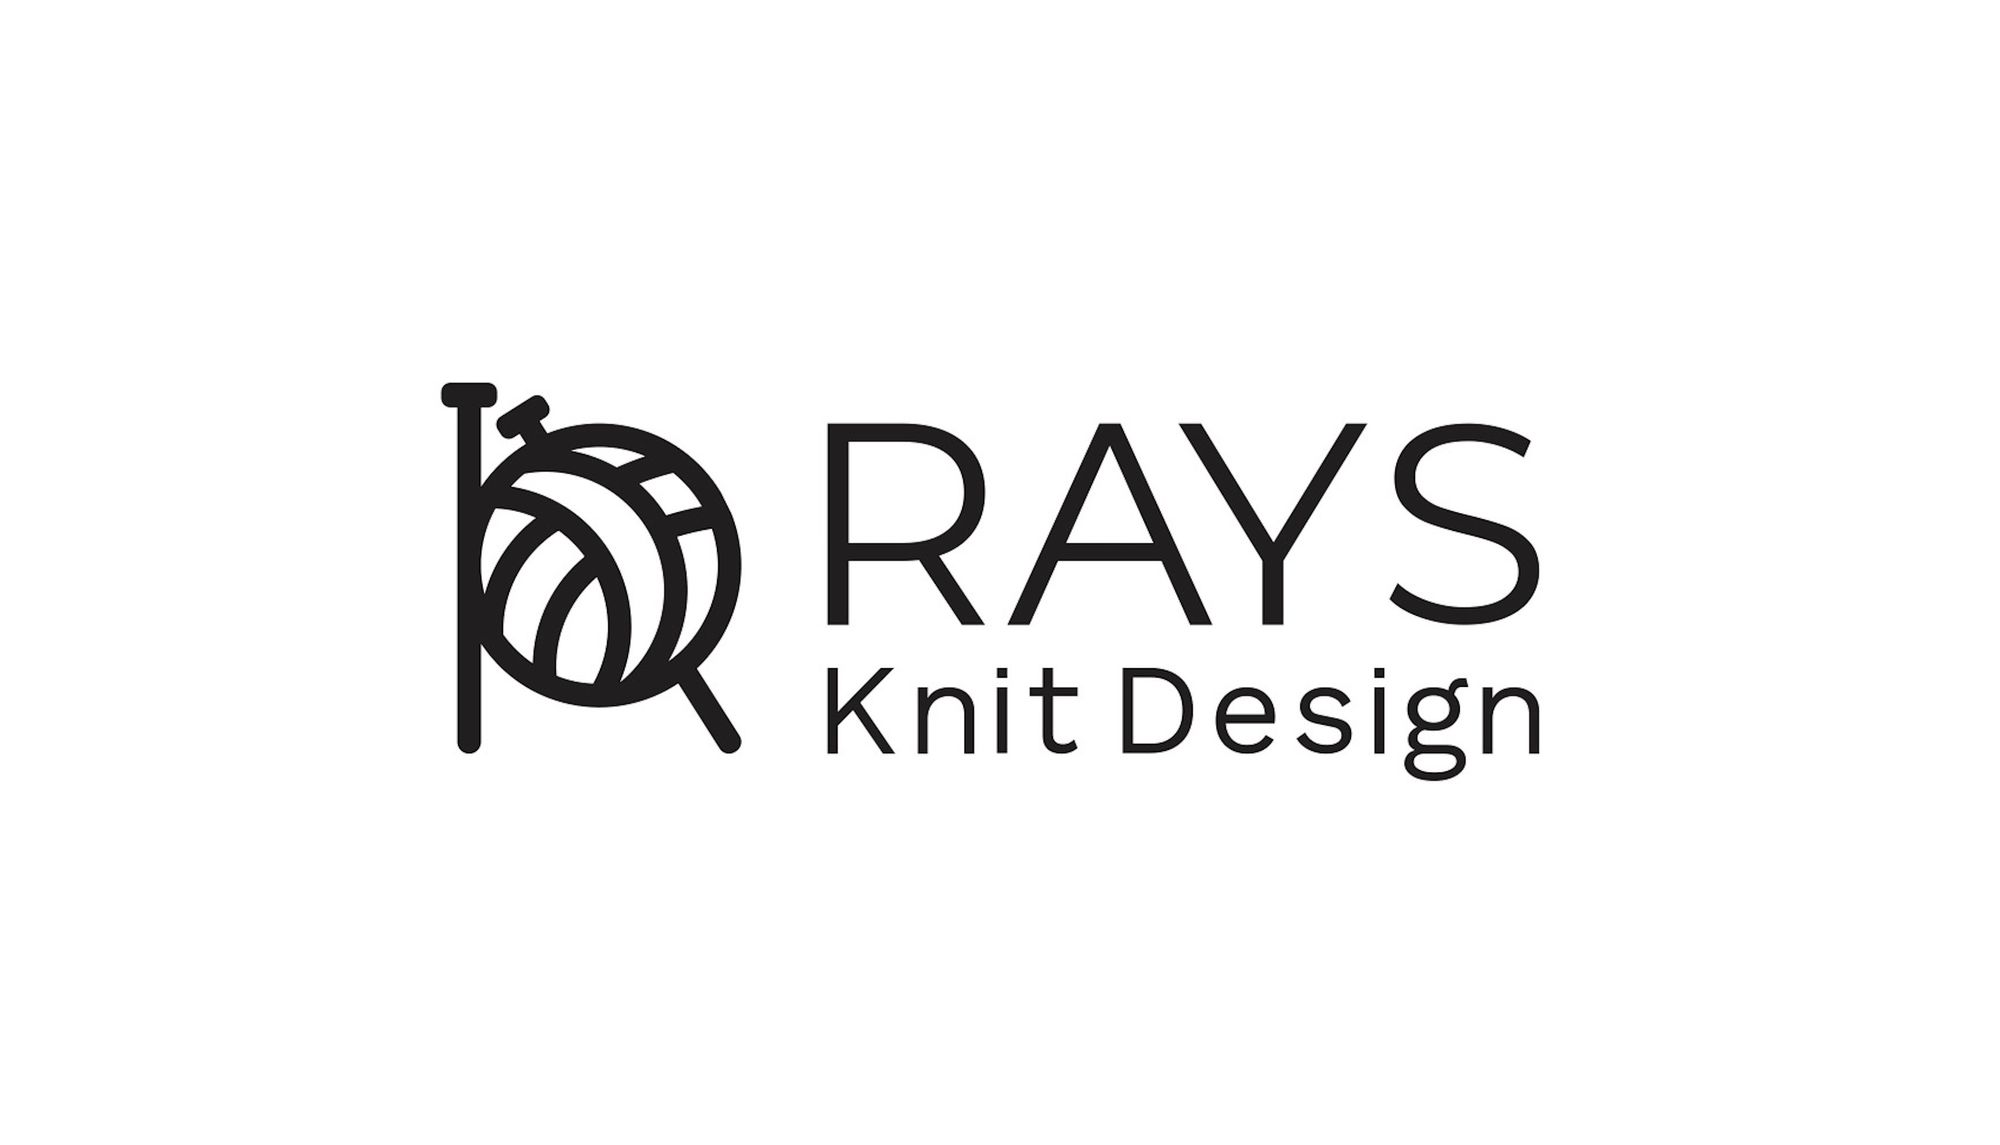 Beautiful and Comfortable - Rays Knit Design